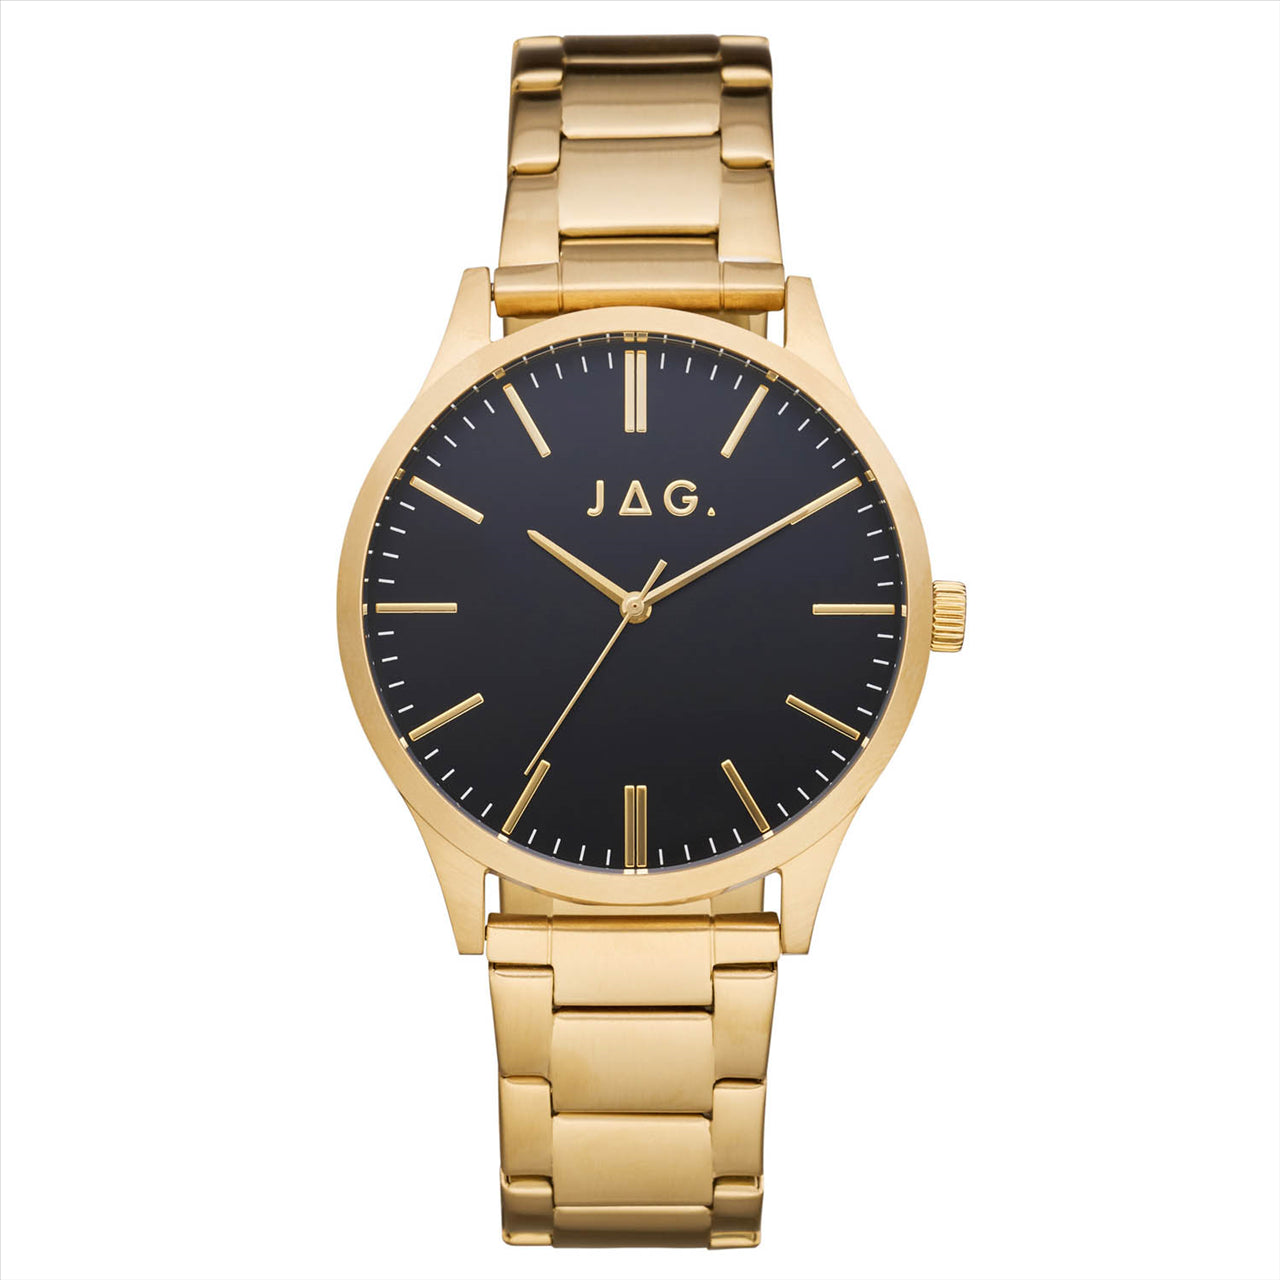 Gents gold plated jag watch with black dial and gold plated bracelet band